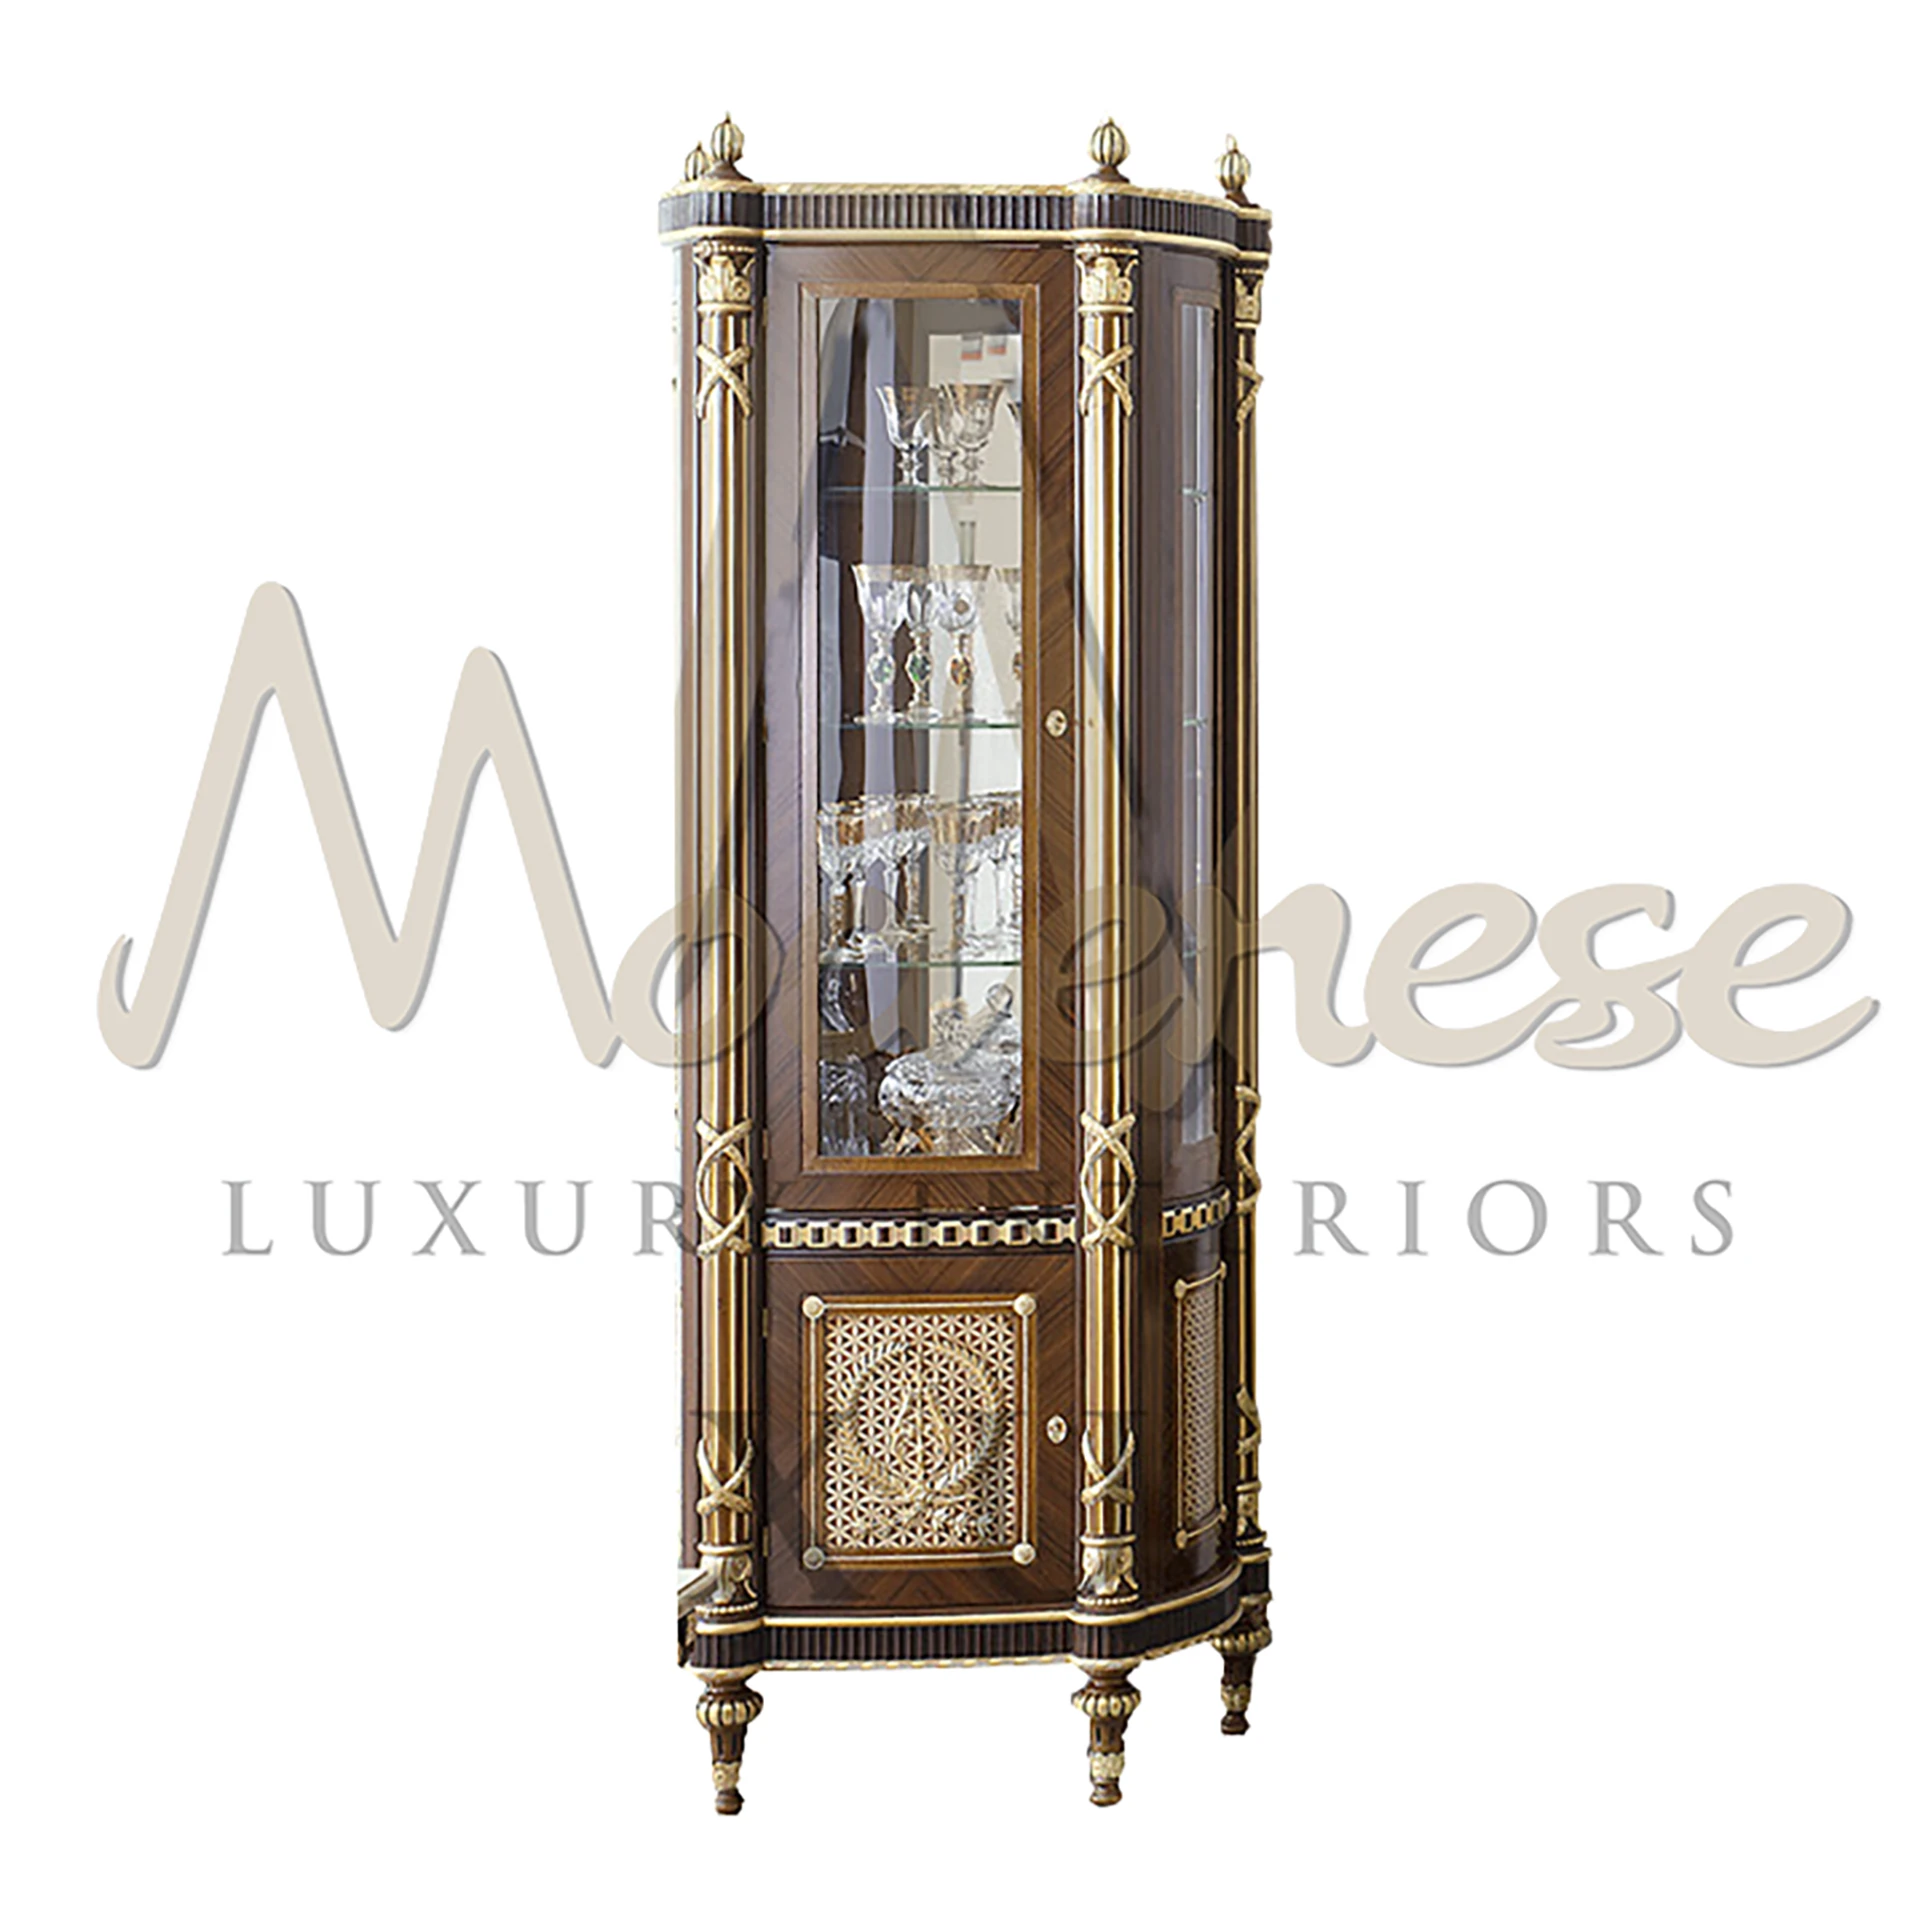 Classic Walnut 1-Door Cabinet with complex gold inlays and fancy carvings